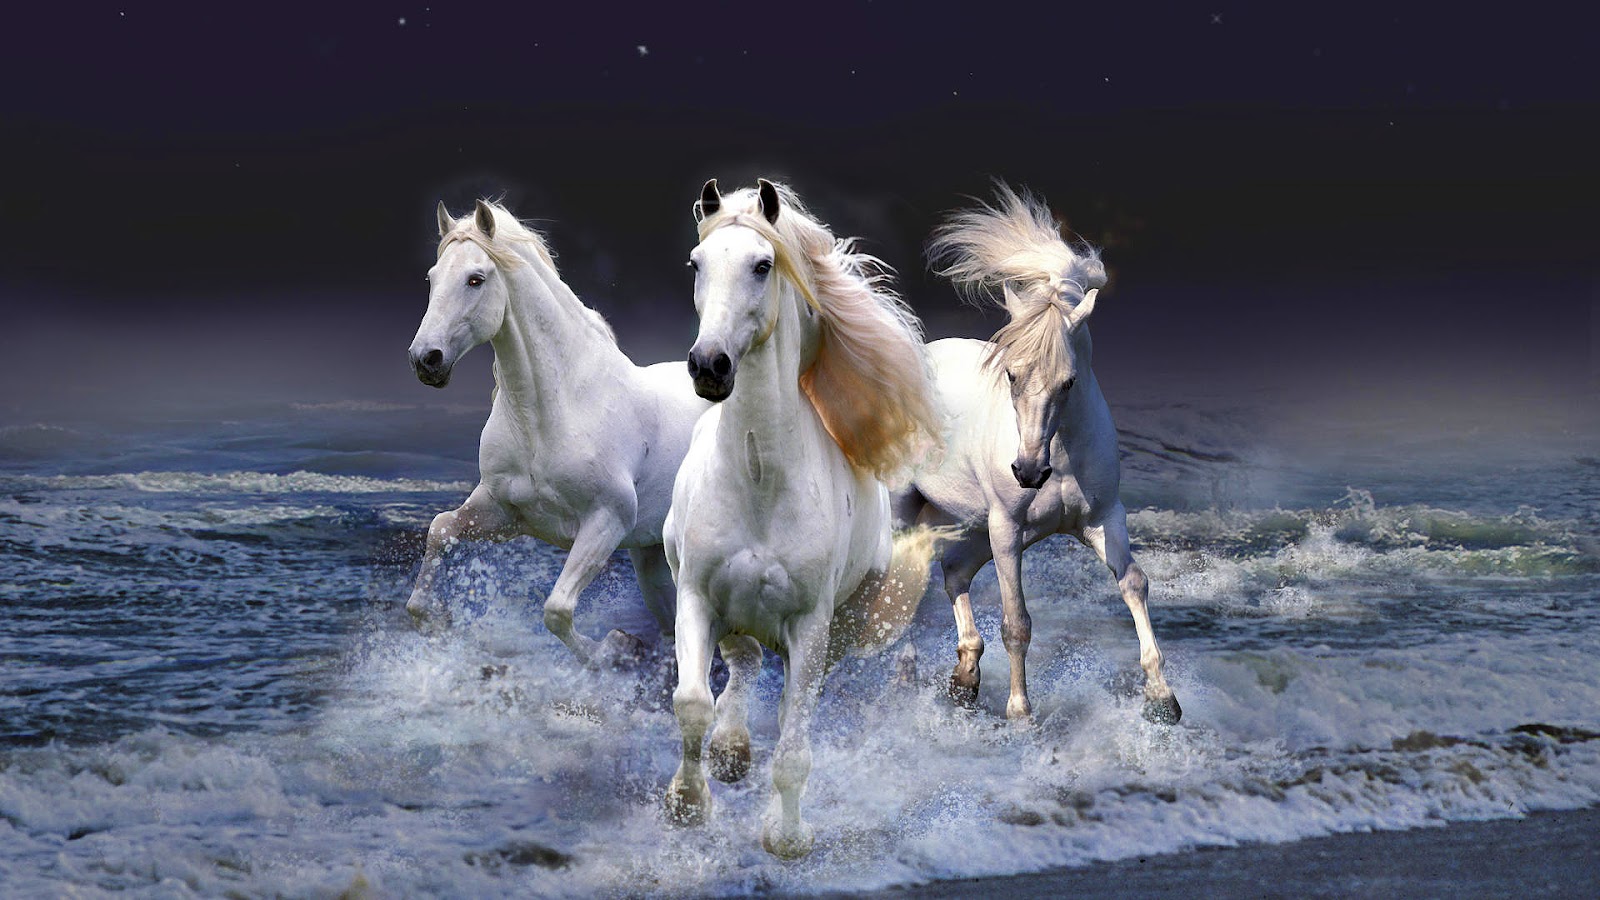 Horses Running Through Water Or Sea Horse Wallpaper Background